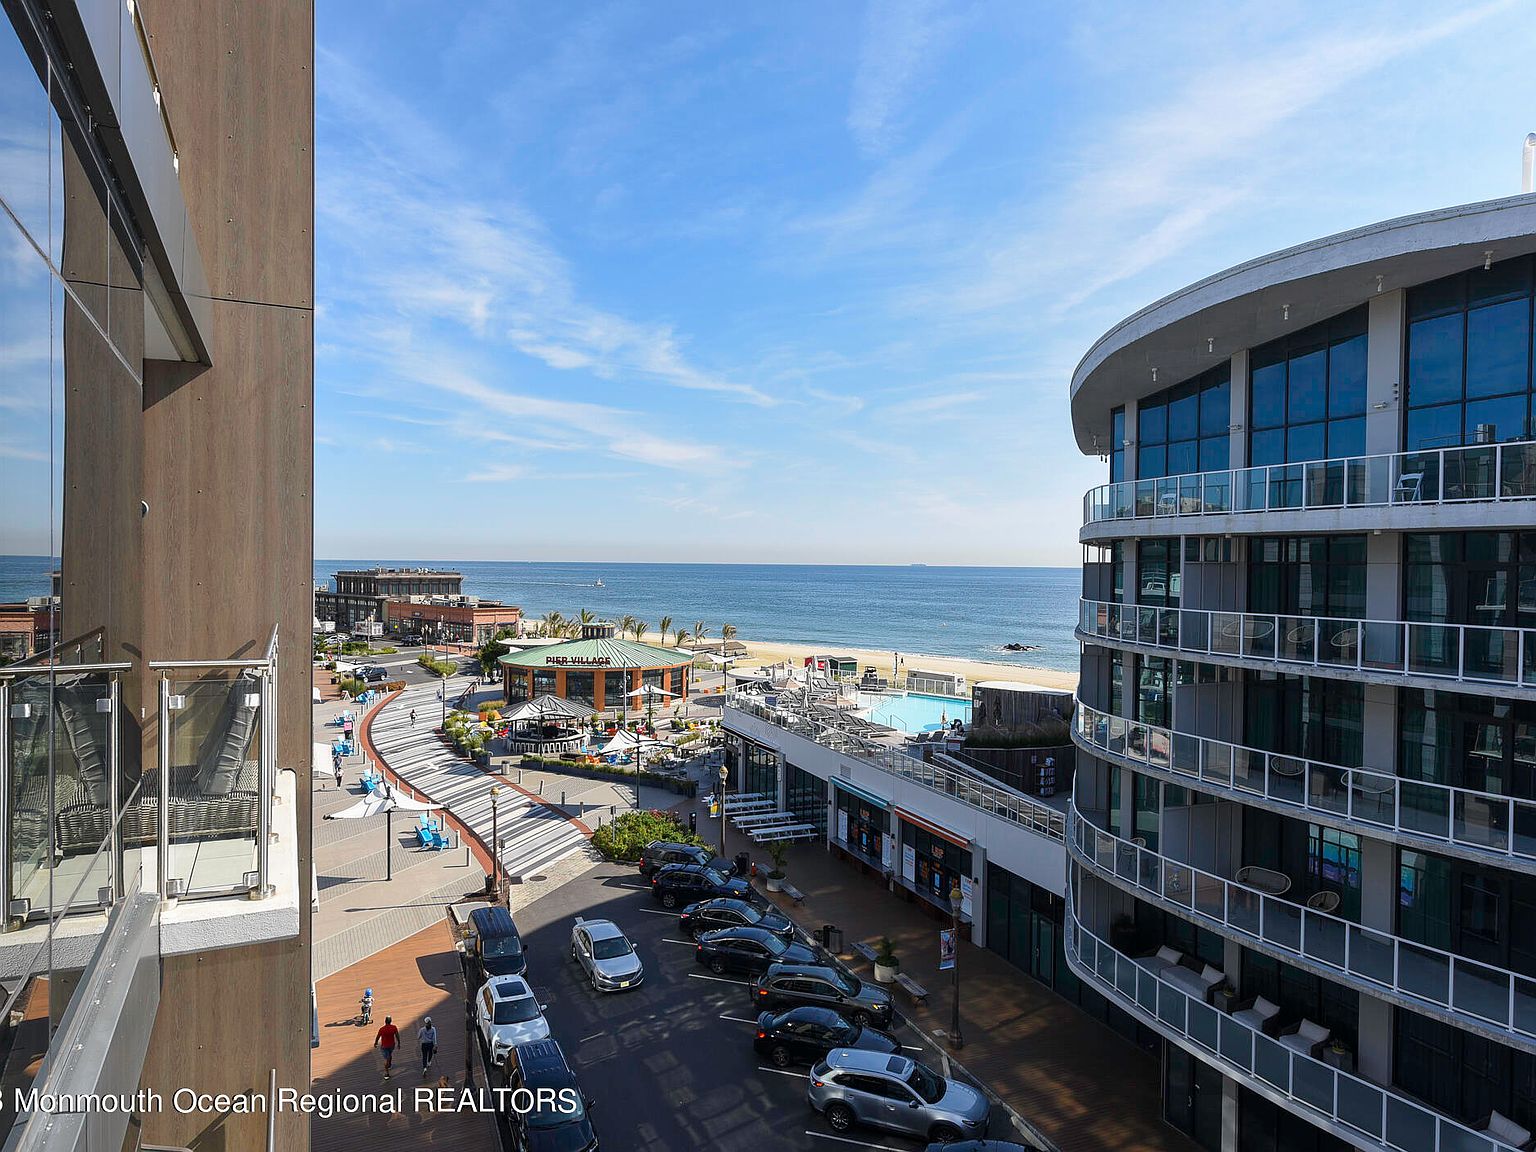 PIER VILLAGE ON LONG BRANCH OCEANFRONT FULLY OPERATIONAL FOR